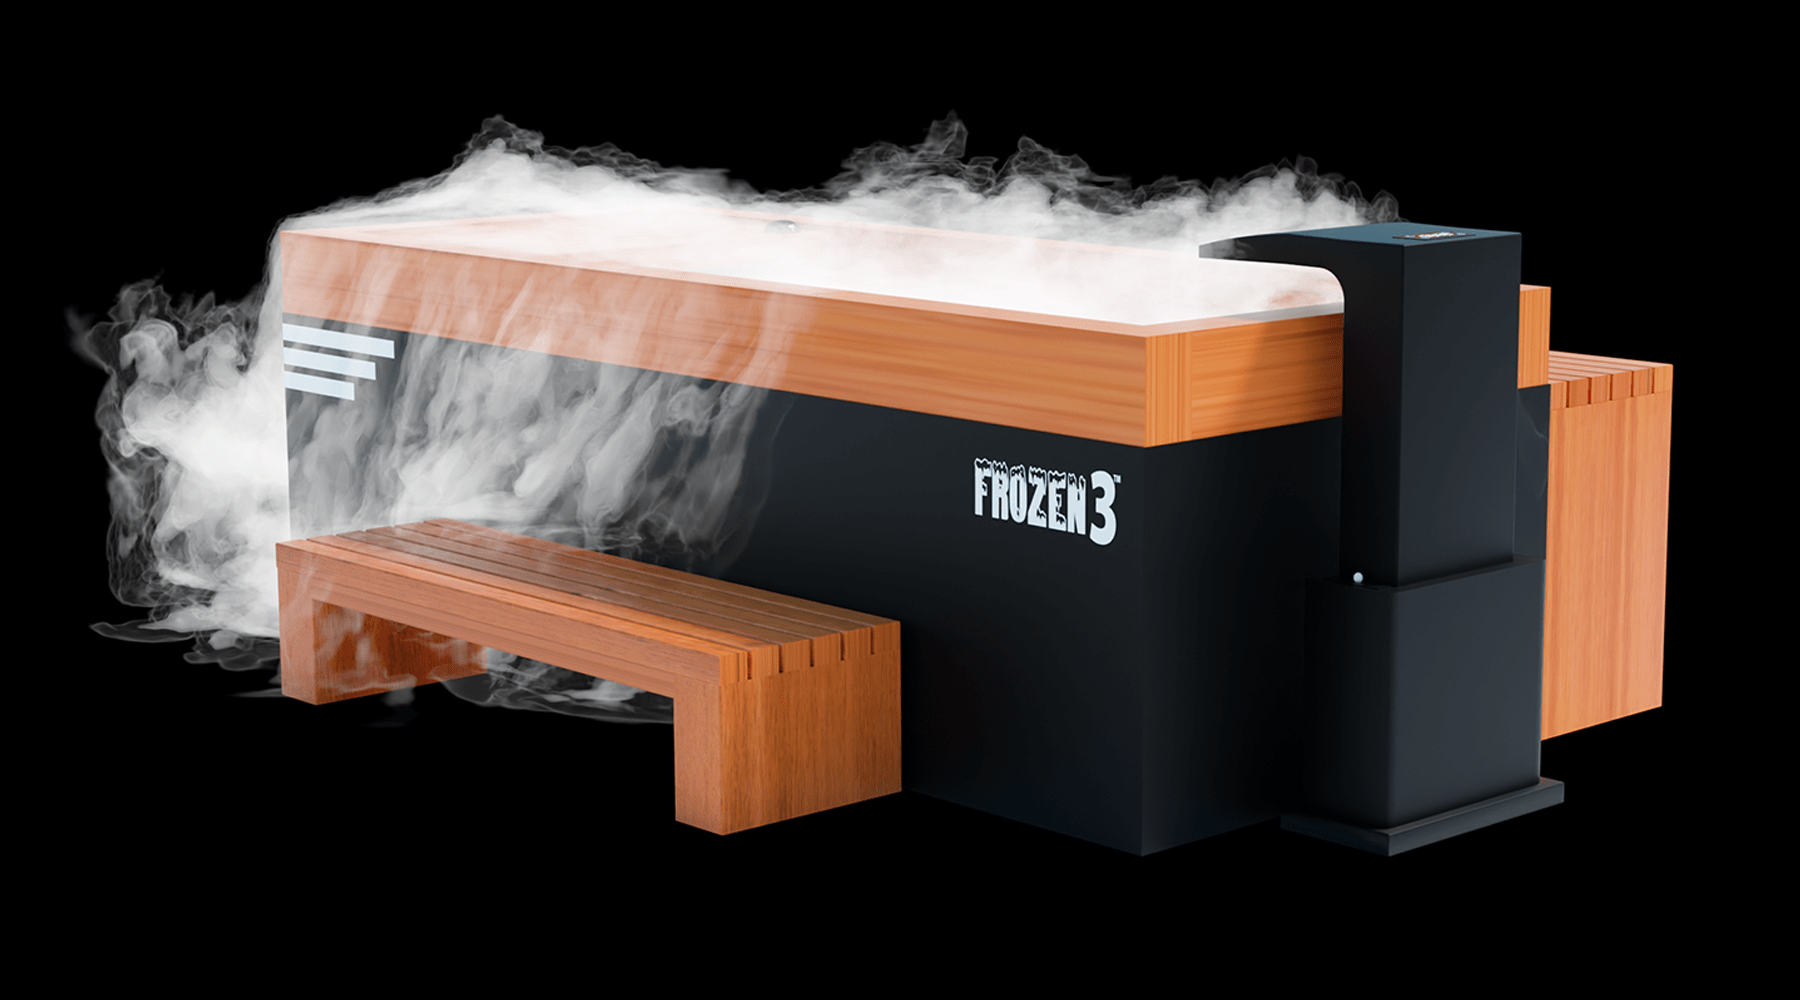 Medical Breakthrough Frozen 3 Cold Plunge Indoor/Outdoor Tub with Essential Oil Infuser and Steam Generator Cold Plunge Tubs Medical Breakthrough   